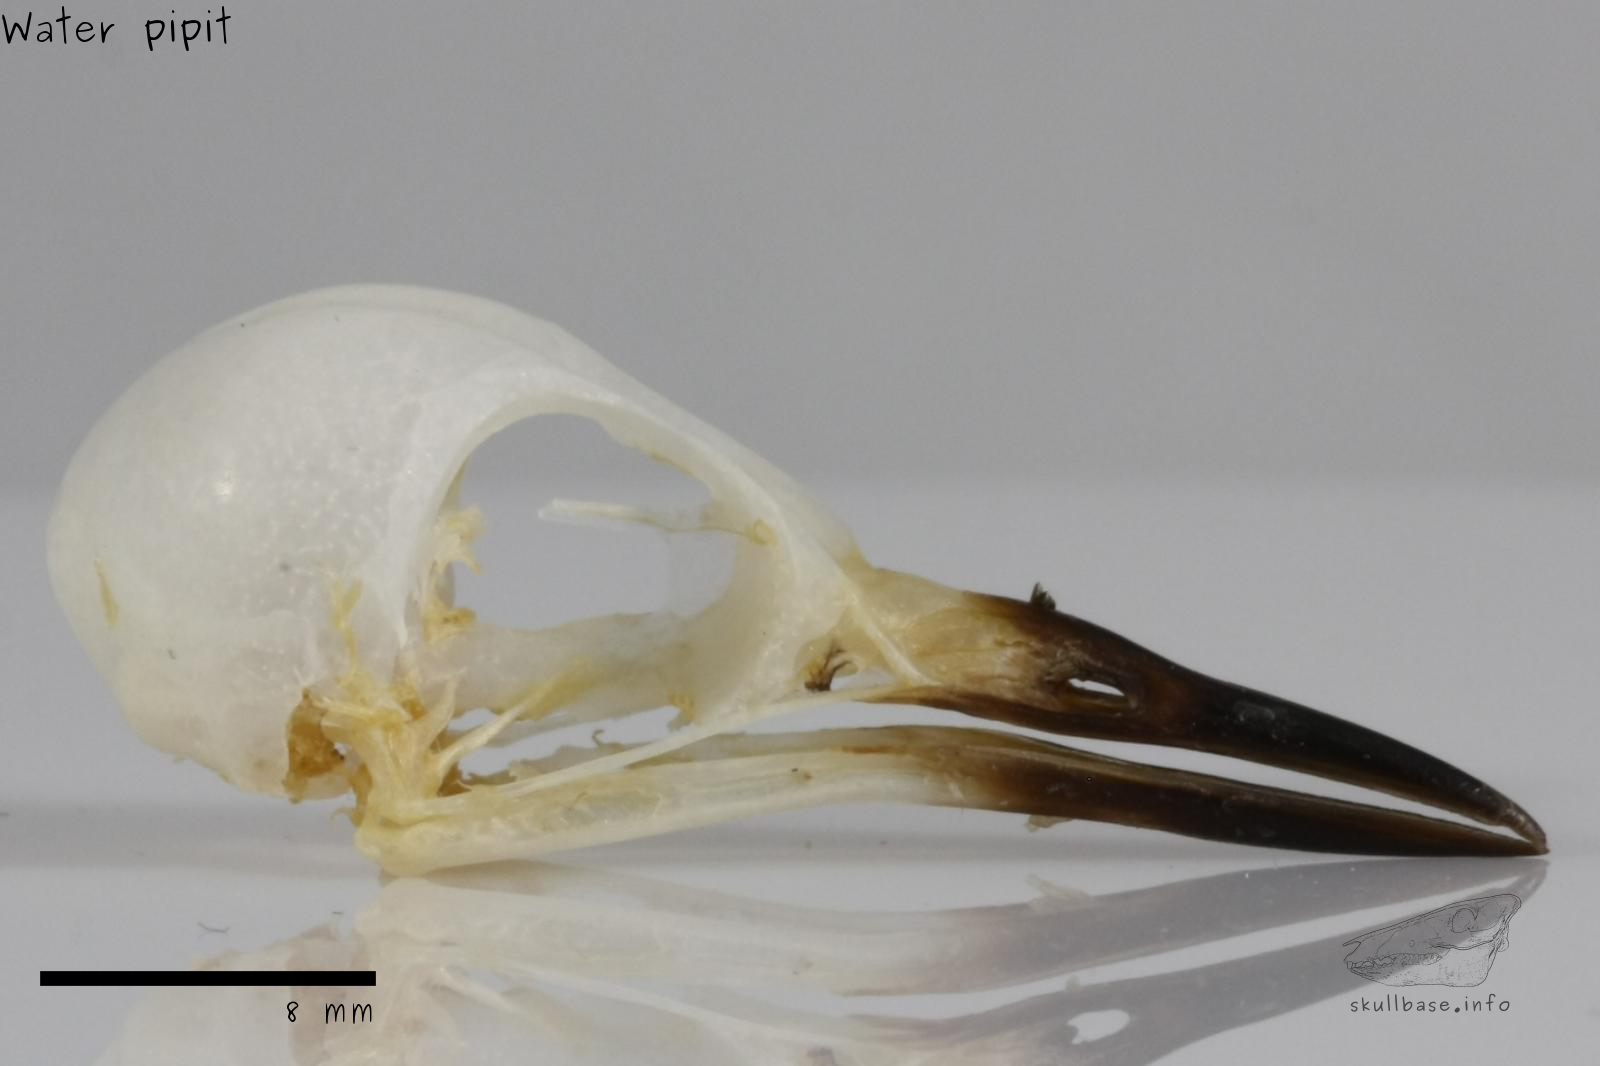 Water pipit (Anthus spinoletta) skull lateral view